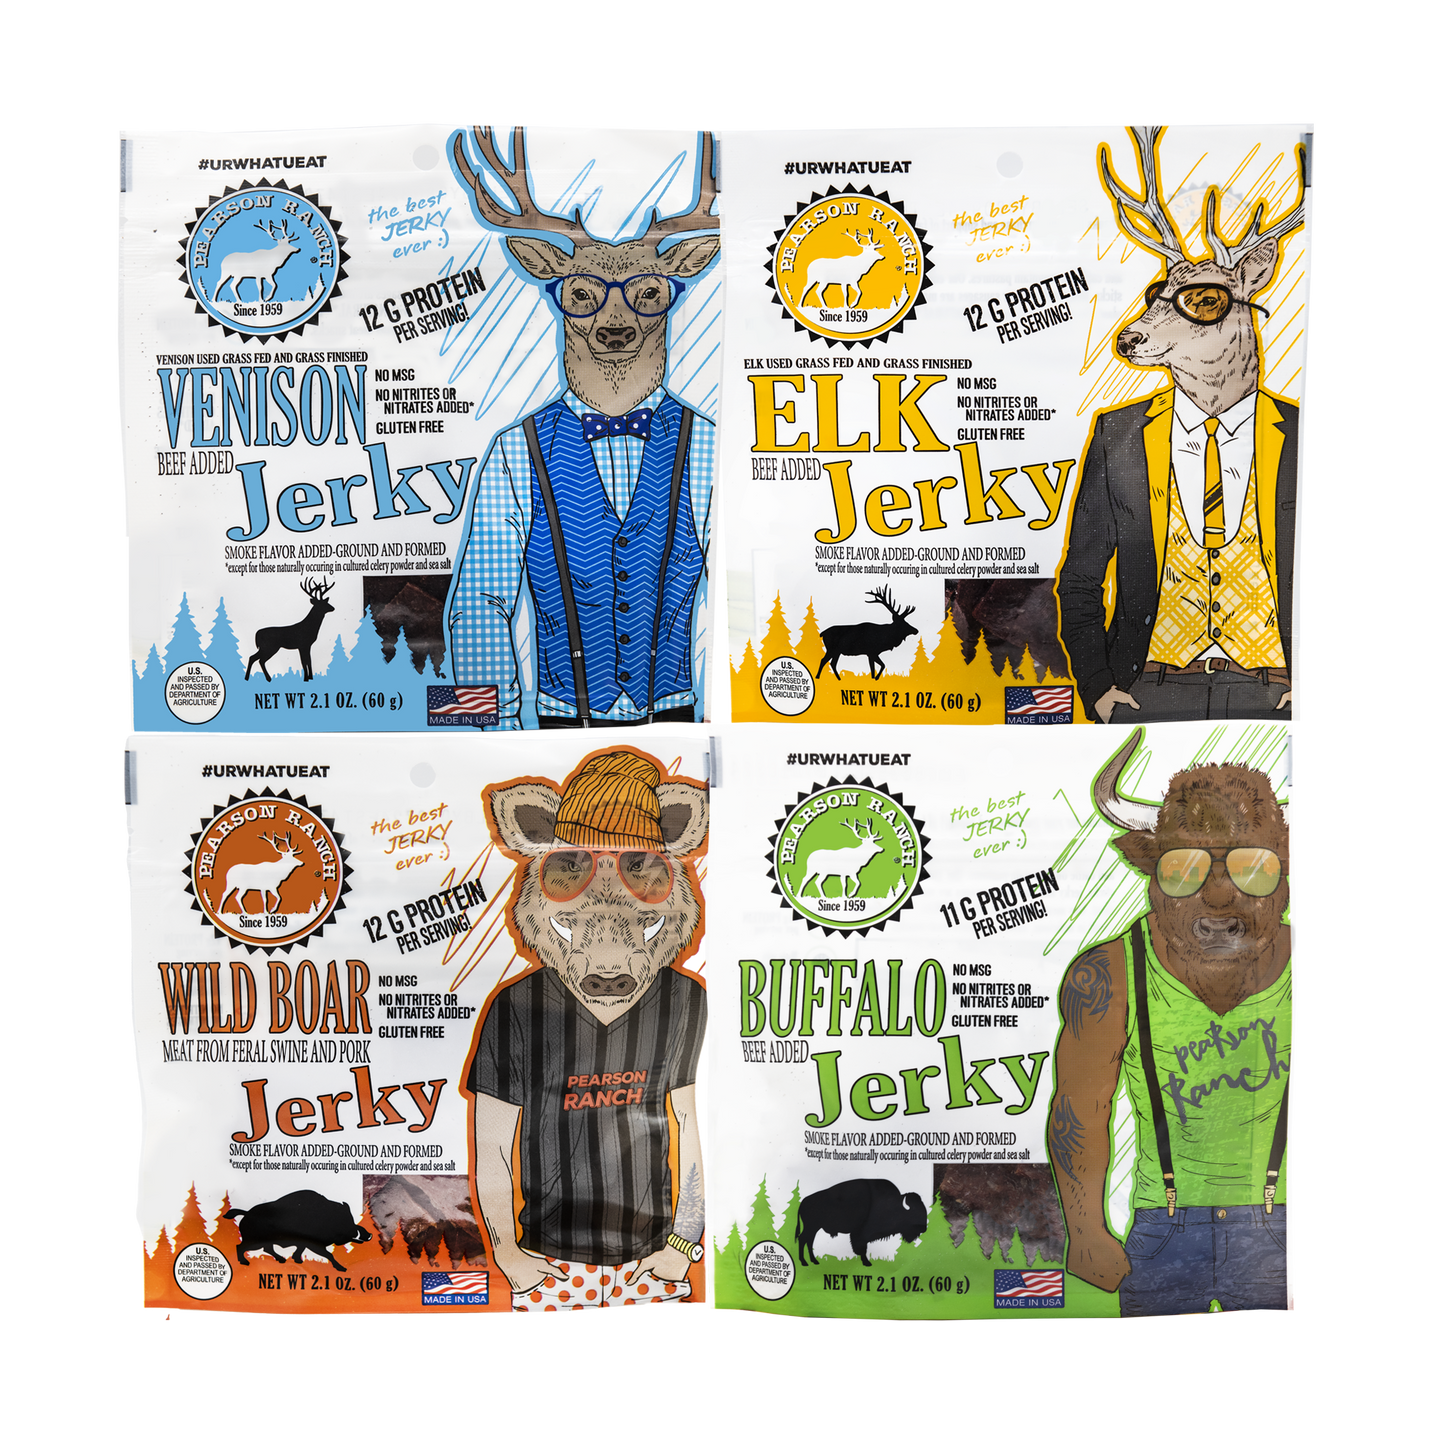 The Whole Chuck Wagon - Ultimate Variety Pack - Pearson Ranch Jerky